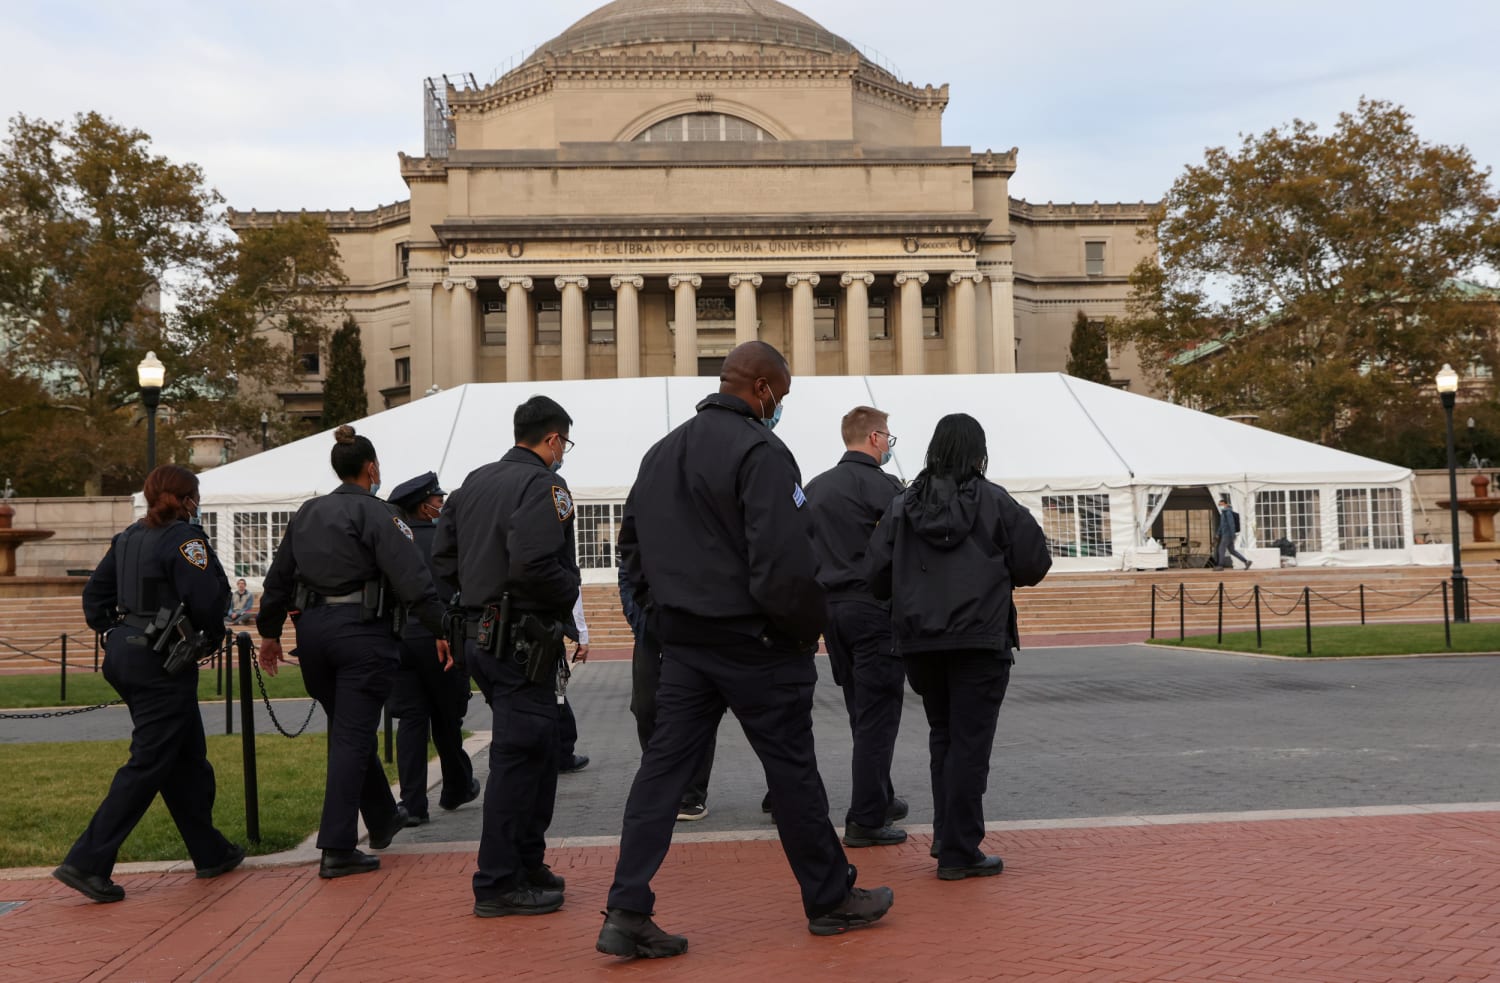 Bomb threats called in at several Ivy League schools over weekend